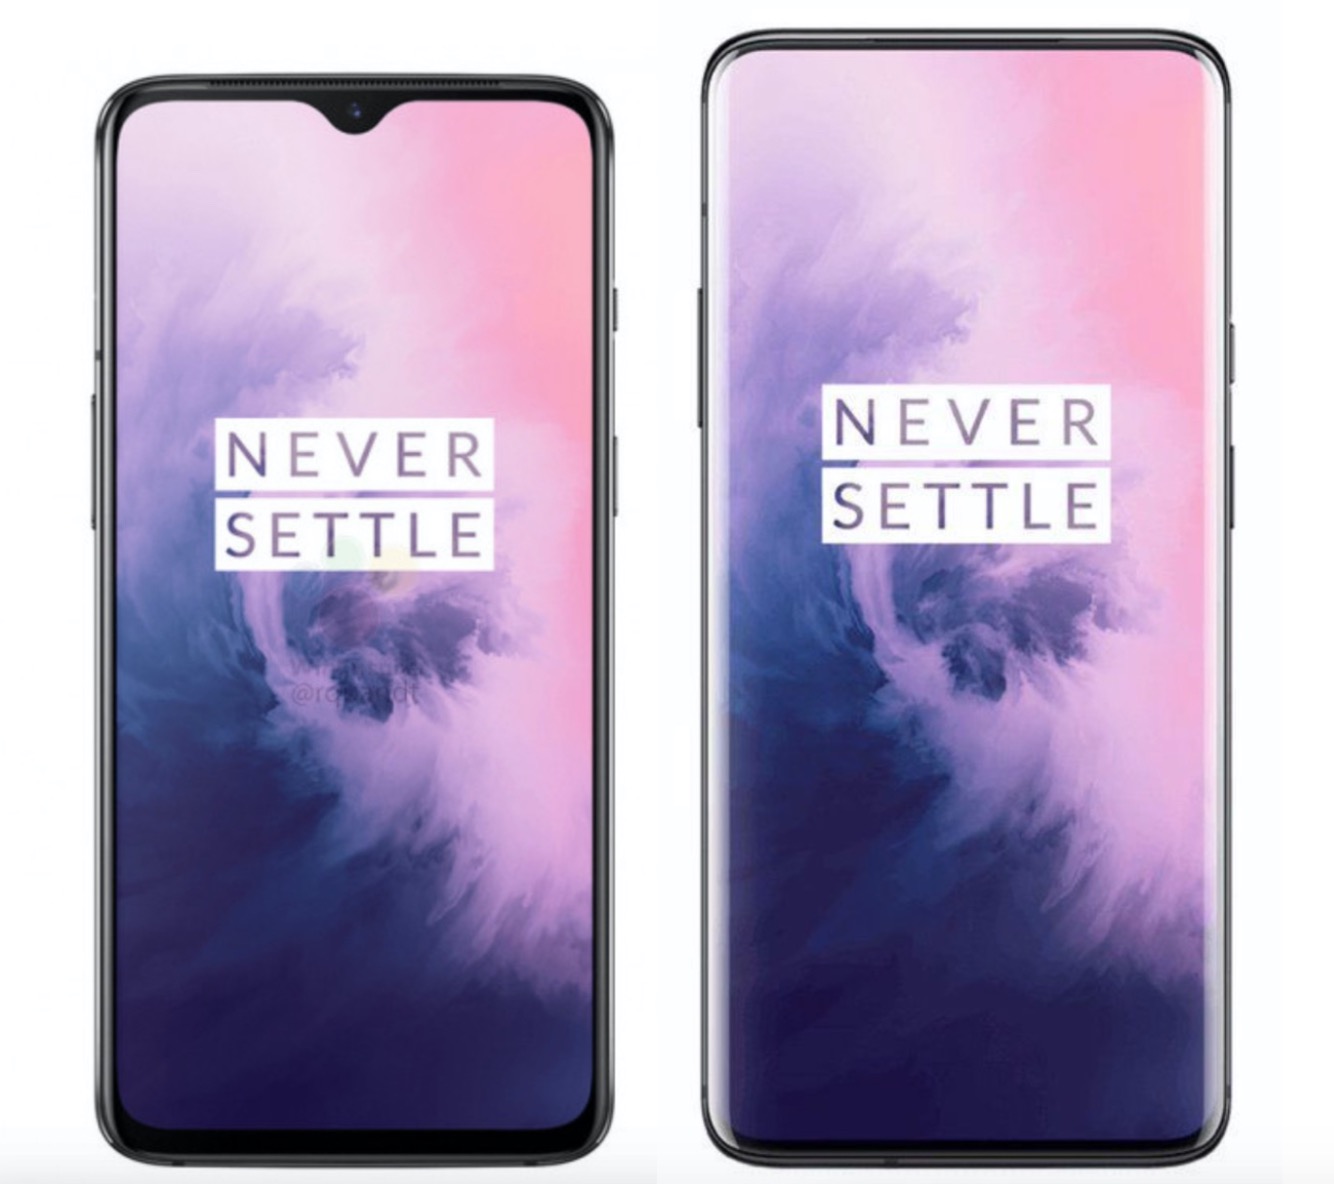 OnePlus 7 vs OnePlus 7 Pro: What You Need to Know